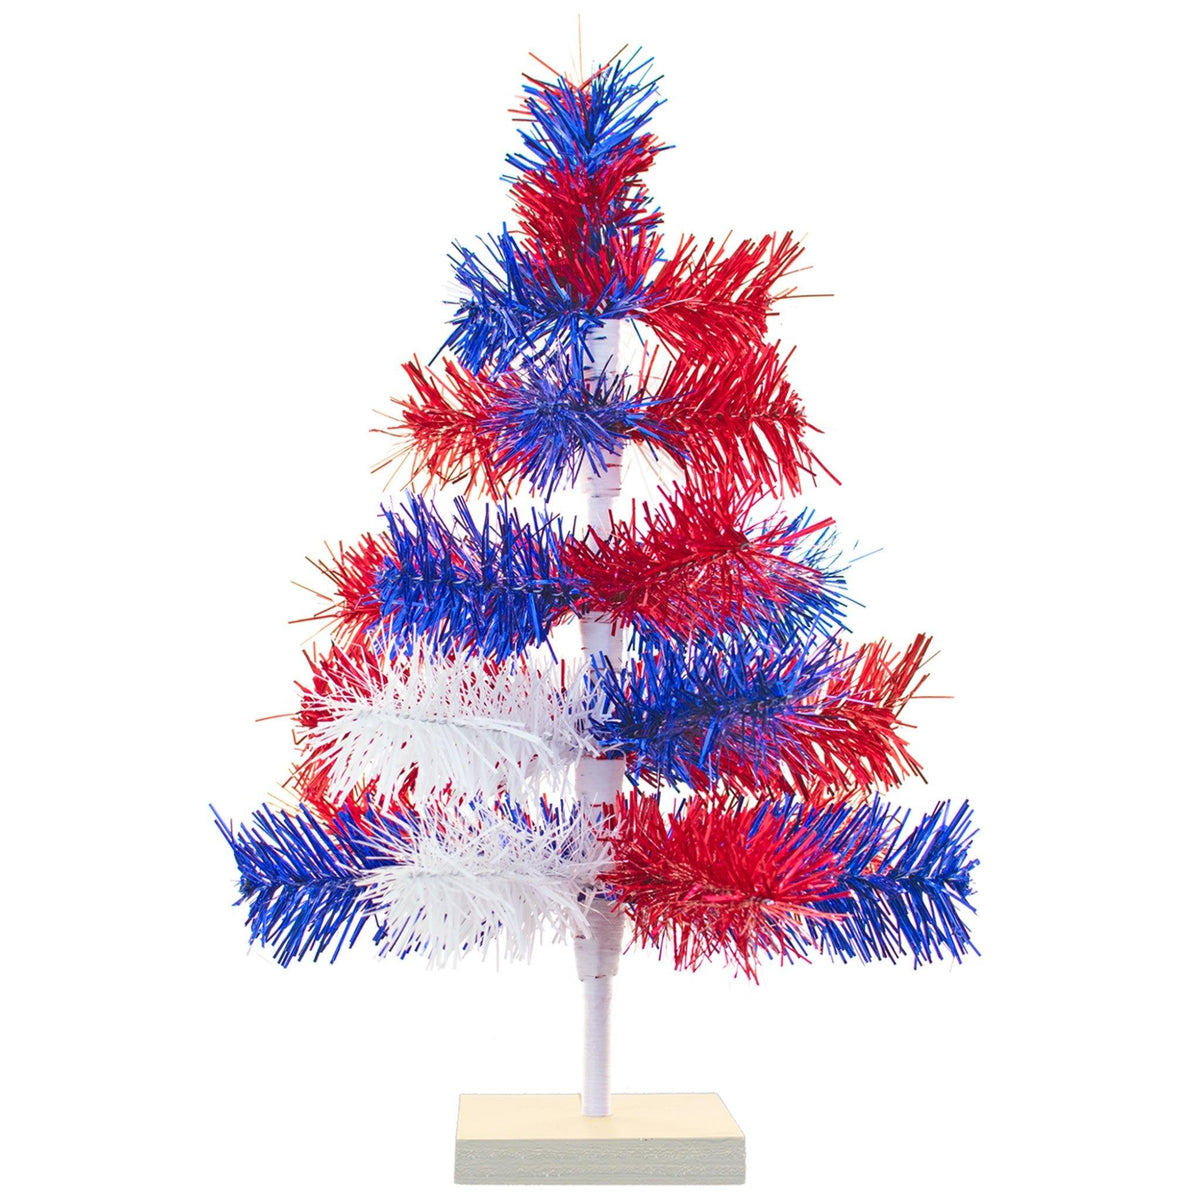 18in Tall Red White and Blue Mixed Tinsel Christmas Tree on sale at leedisplay.com.